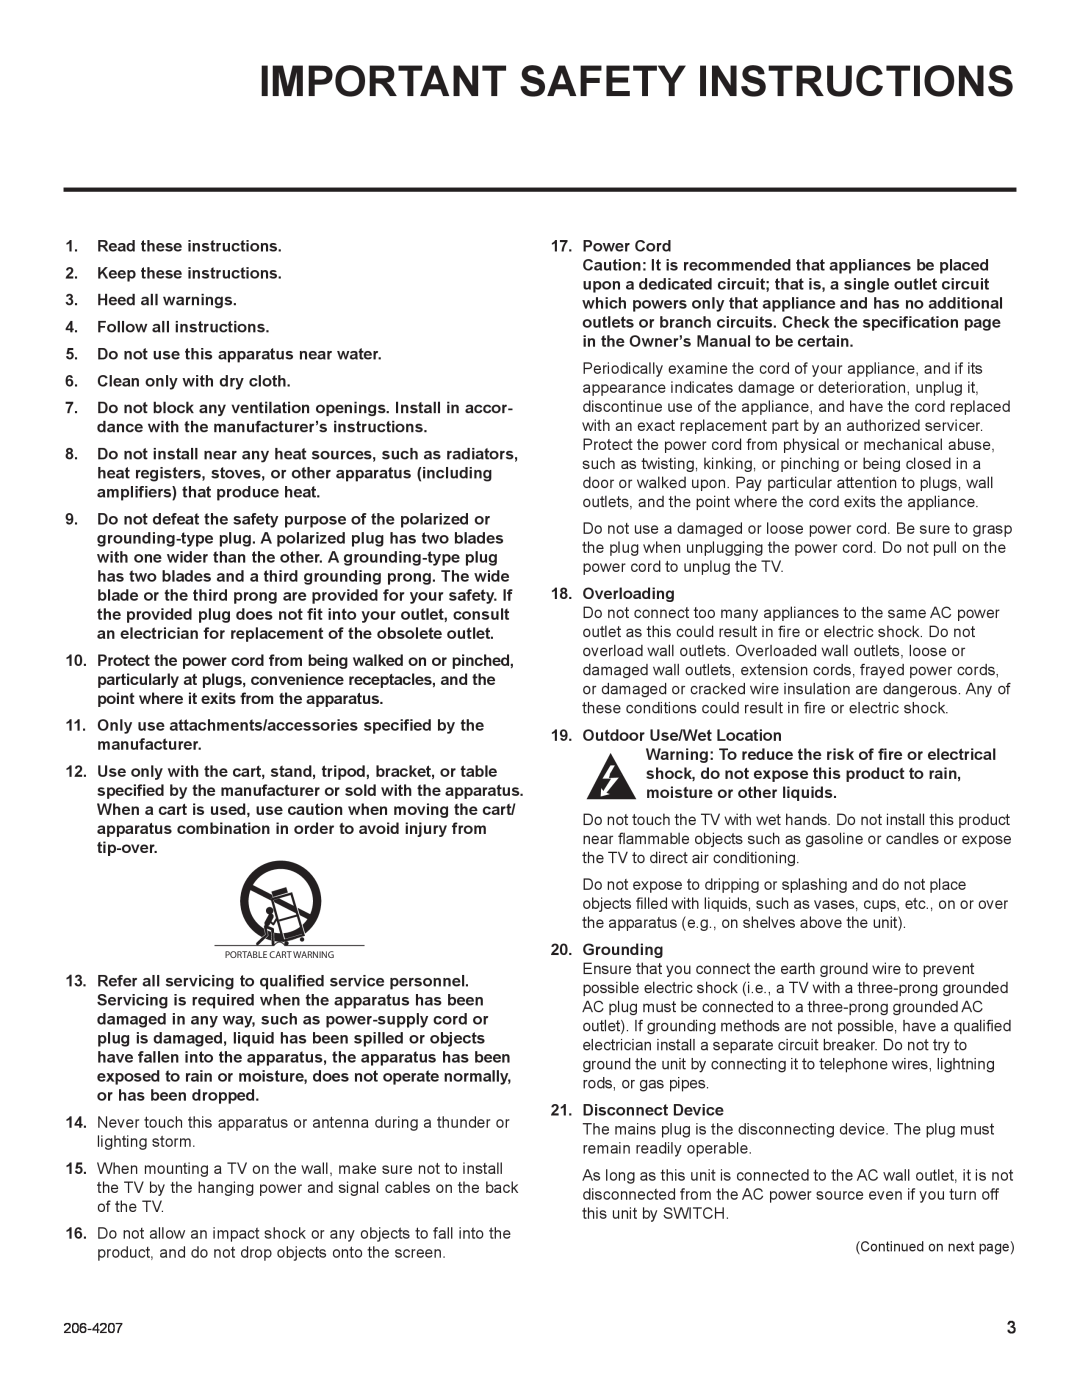 LG Electronics 32LQ630H Important Safety Instructions, Read these instructions 2. Keep these instructions, Power Cord 